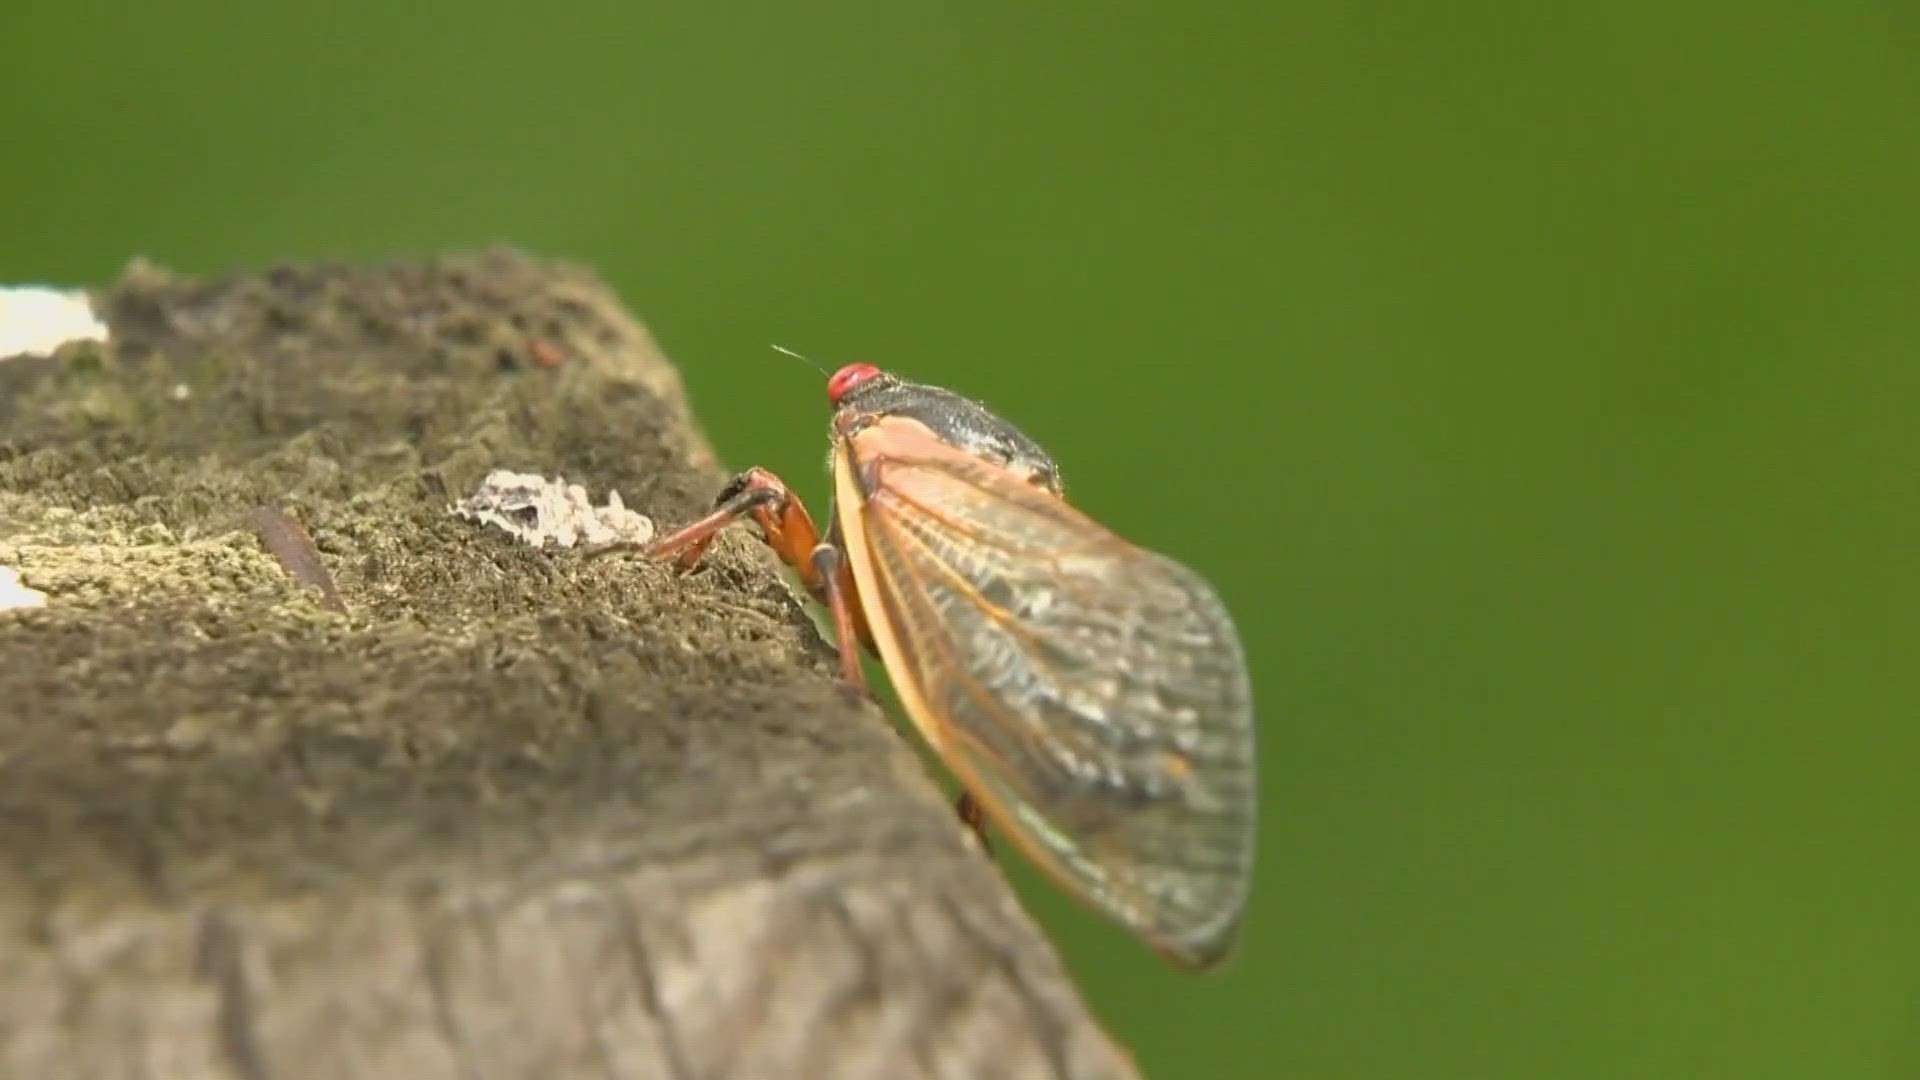 An NC State professor said the noisy bugs are harmless. You’ll soon see them in droves.